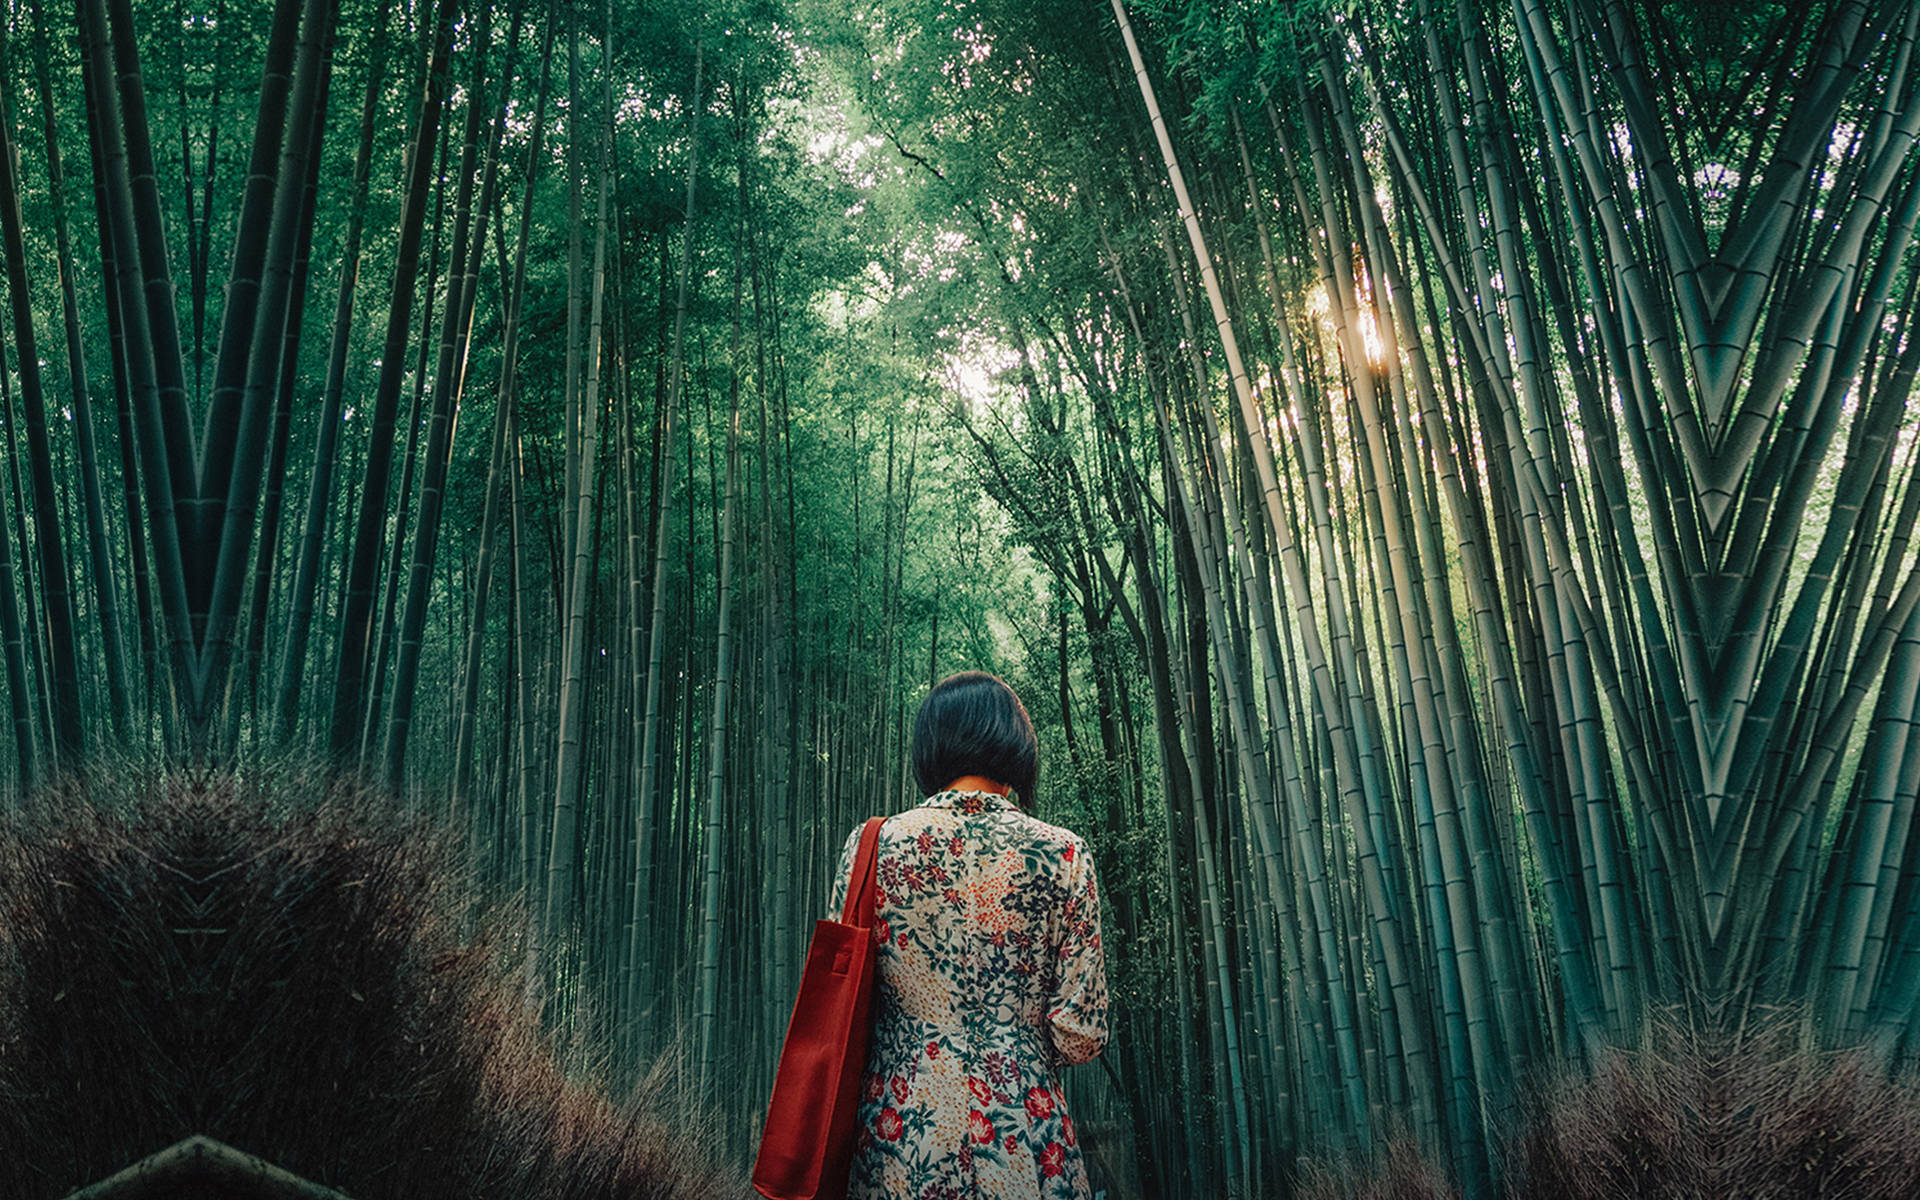 Surreal Panorama Of A Bamboo Forest Captured Through An Iphone Lens. Wallpaper